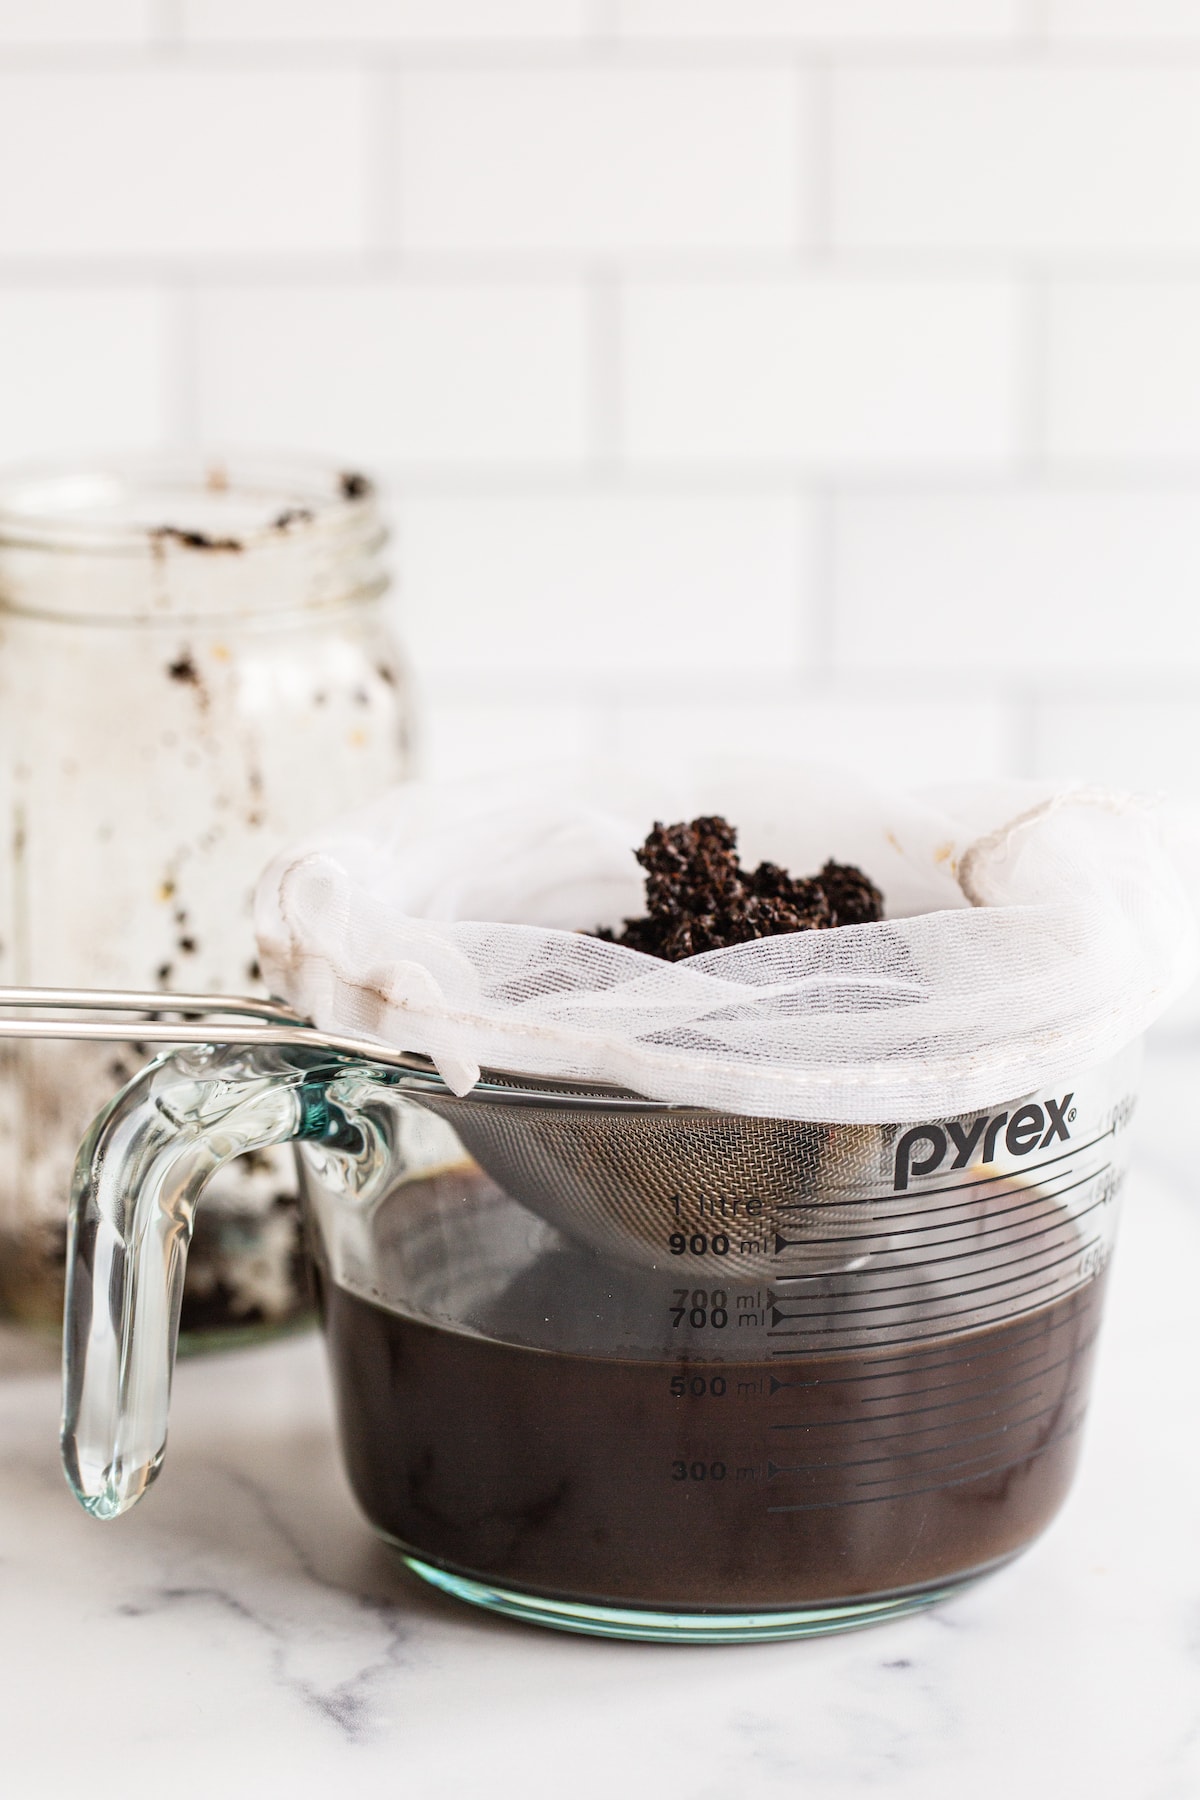 Pyrex glass measuring bowl with cold brew strained from a sieve and cheese cloth with coffee grounds.